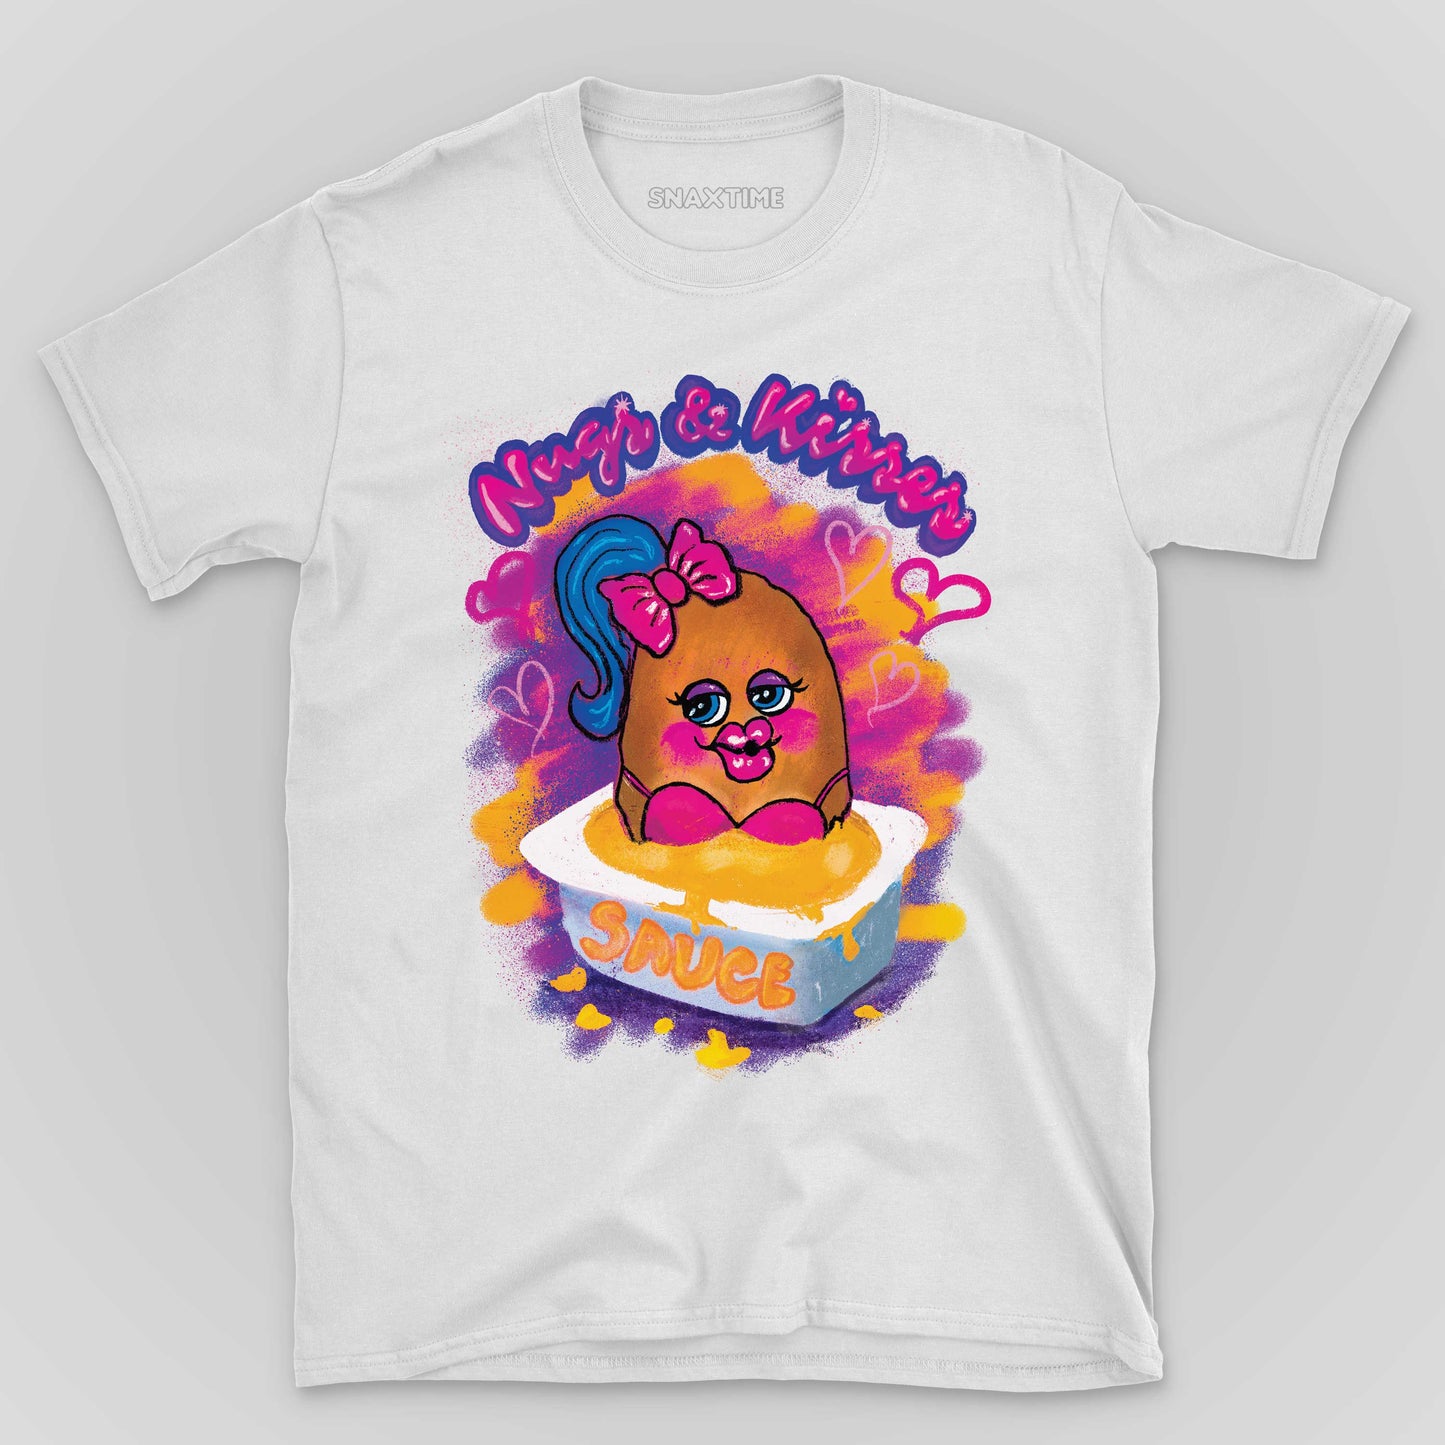 White Nugs and Kisses Graphic T-Shirt by Snaxtime